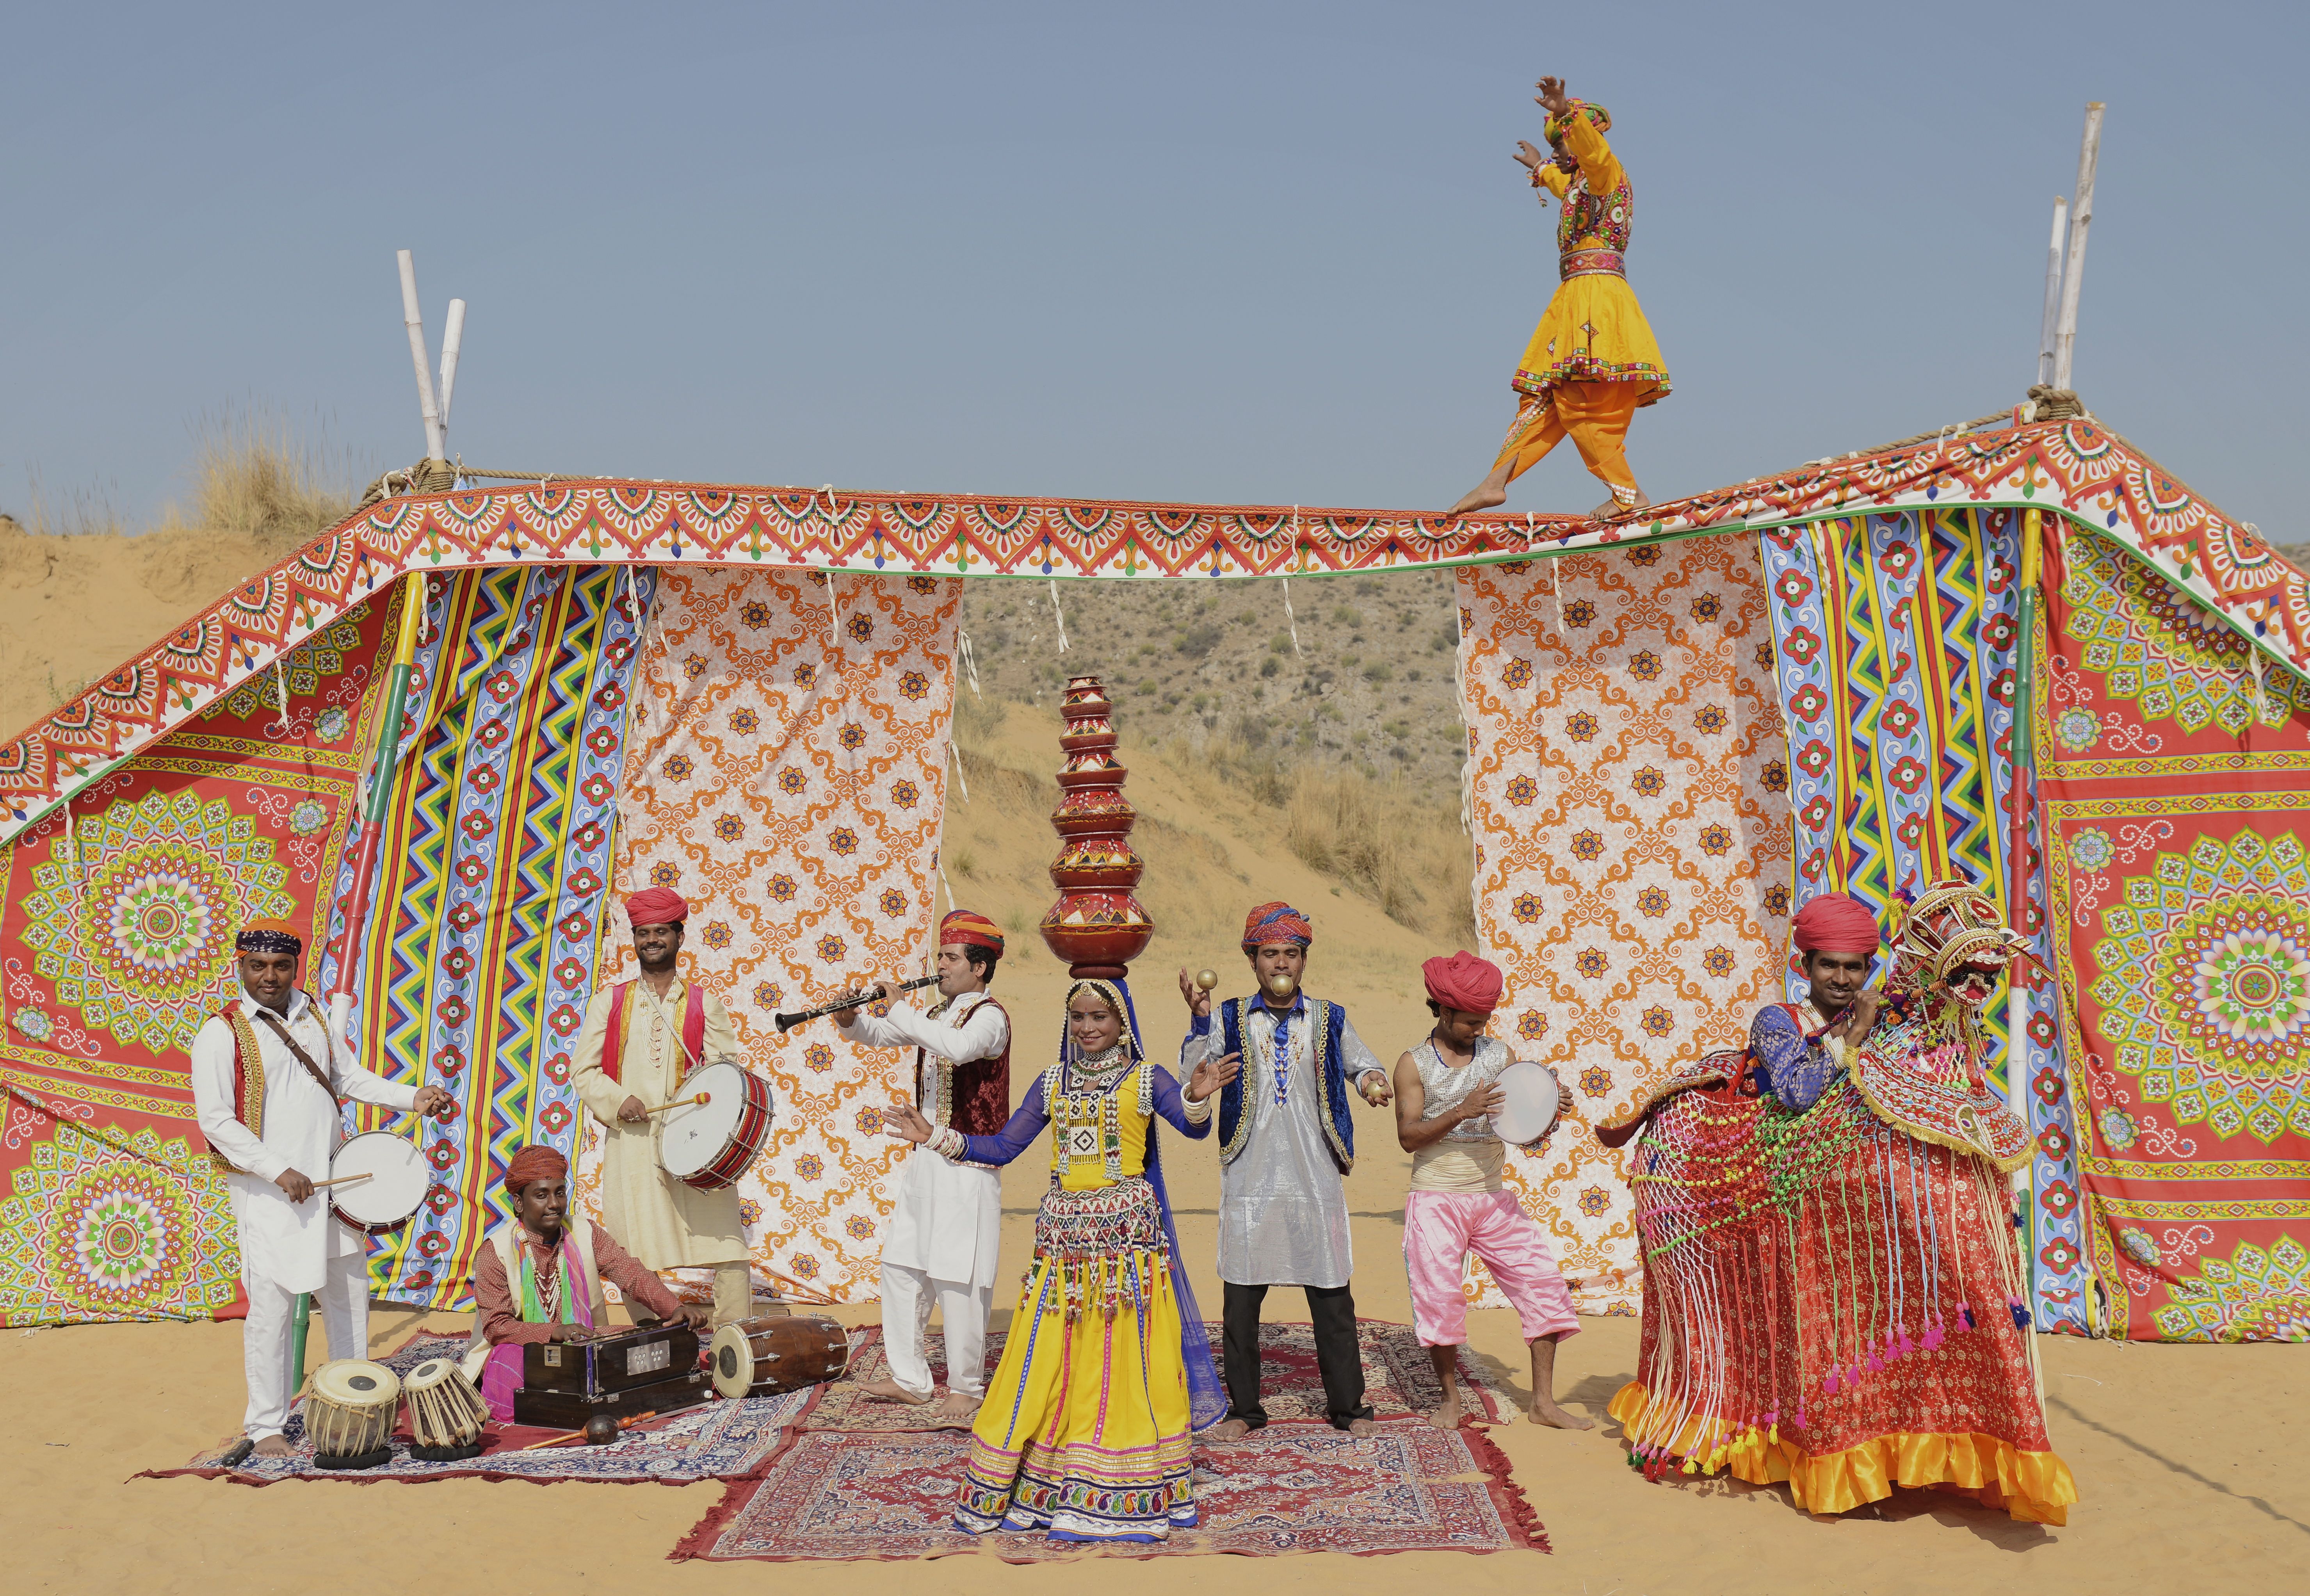 Musical perfomers under a tent in the desert